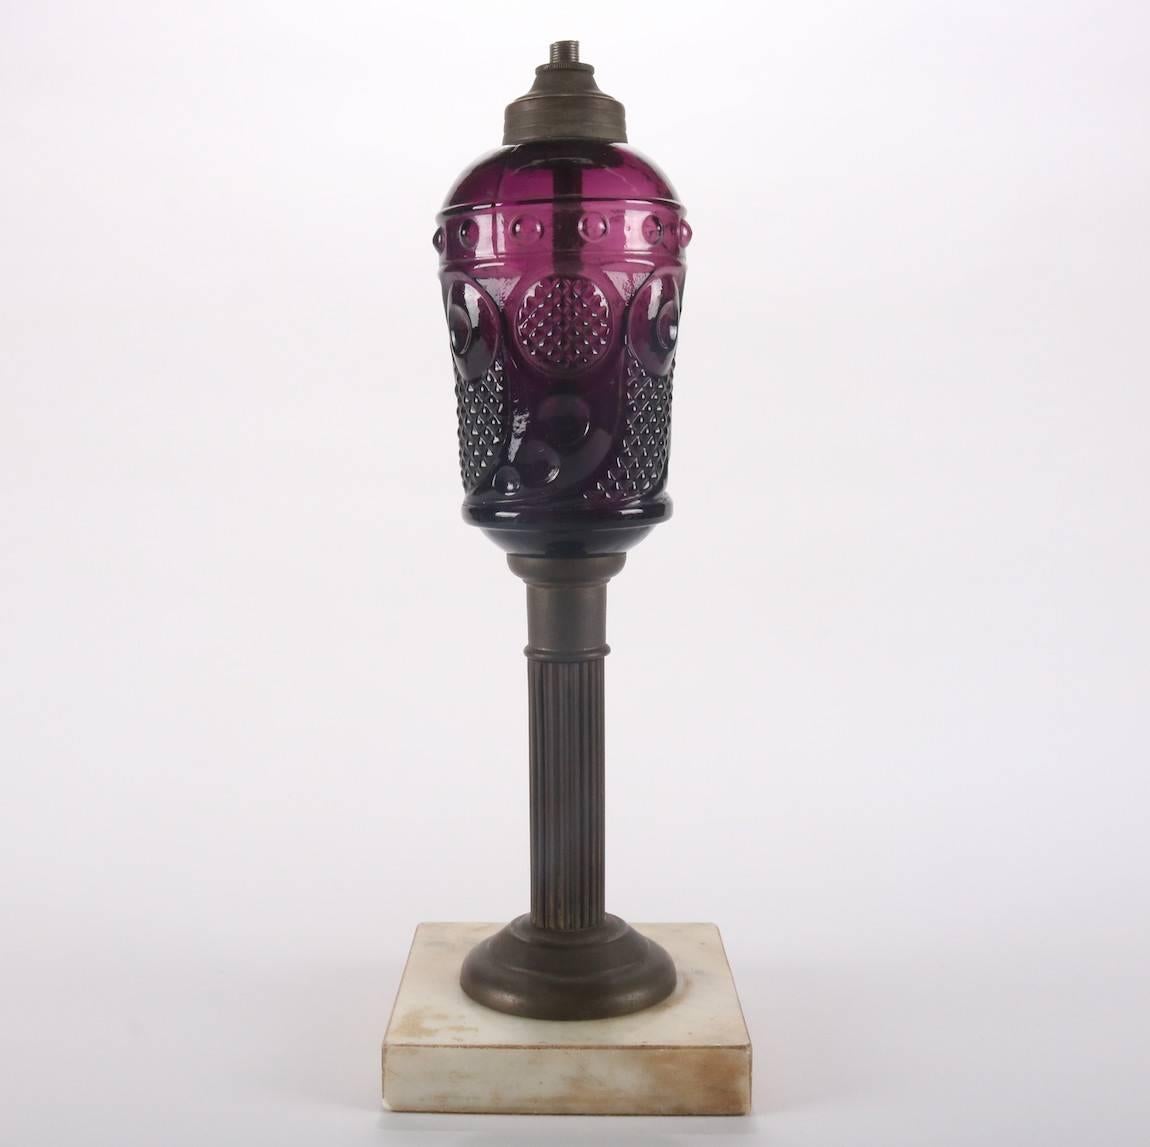 Antique and rare early American Pattern glass oil lamp features amethyst flint glass font in Comet or Horn of Plenty font by Mckee Sandwich Glass, reeded bronze column on marble base, drilled for electricity, circa 1880

***DELIVERY NOTICE – Due to